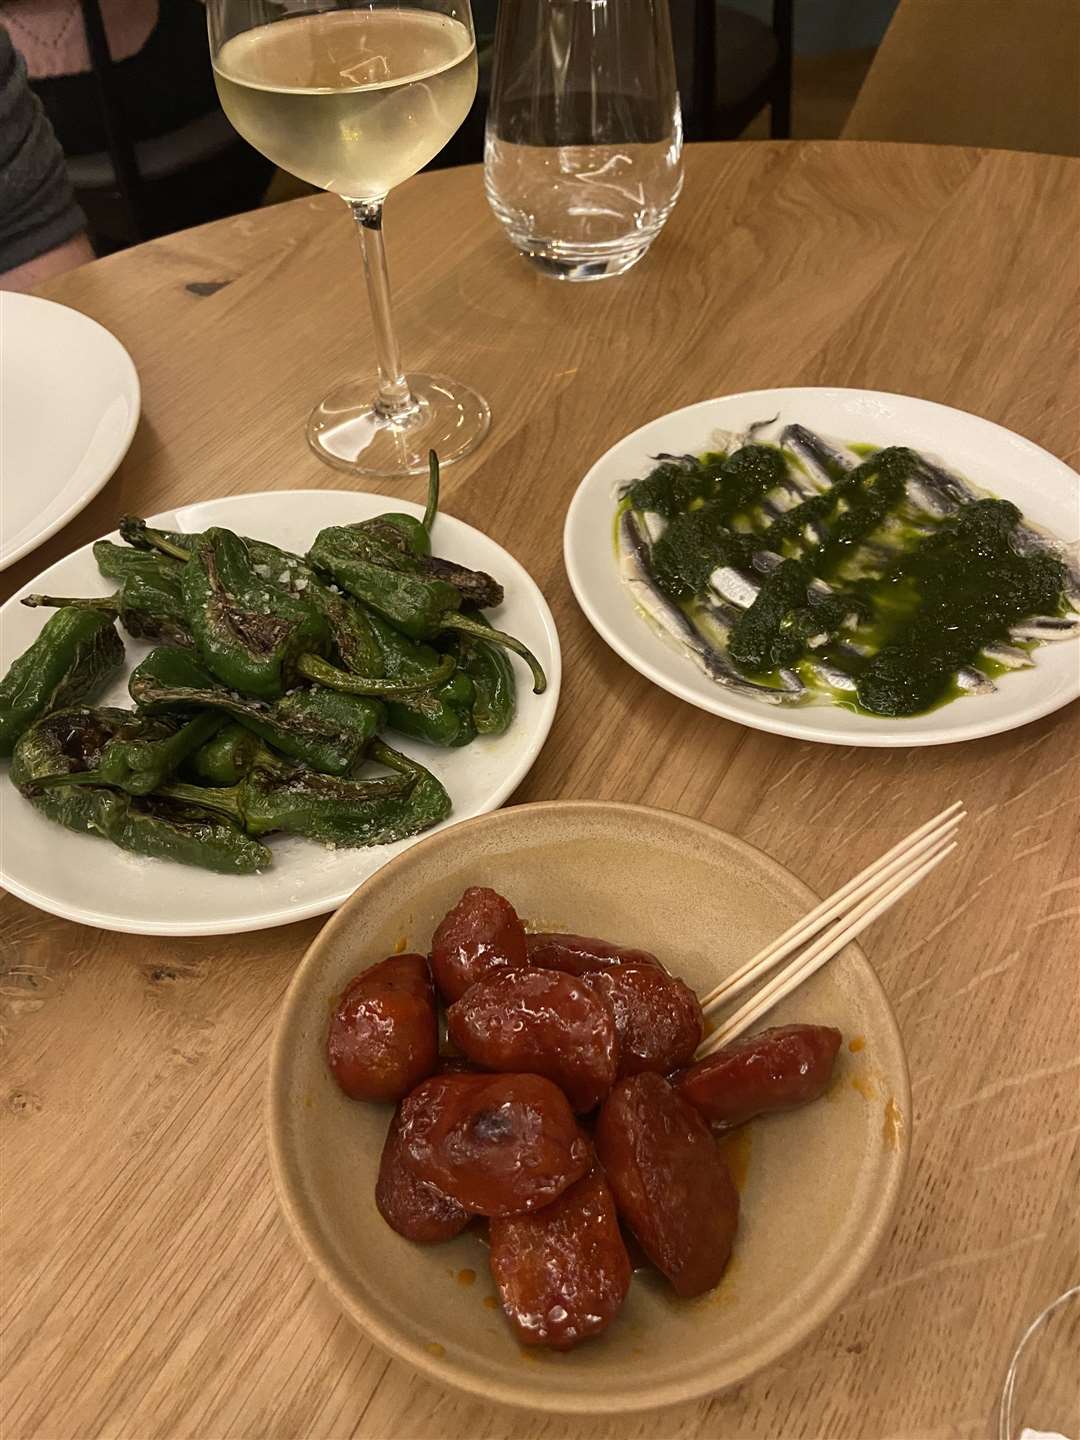 Chorizo, padron peppers and anchovies